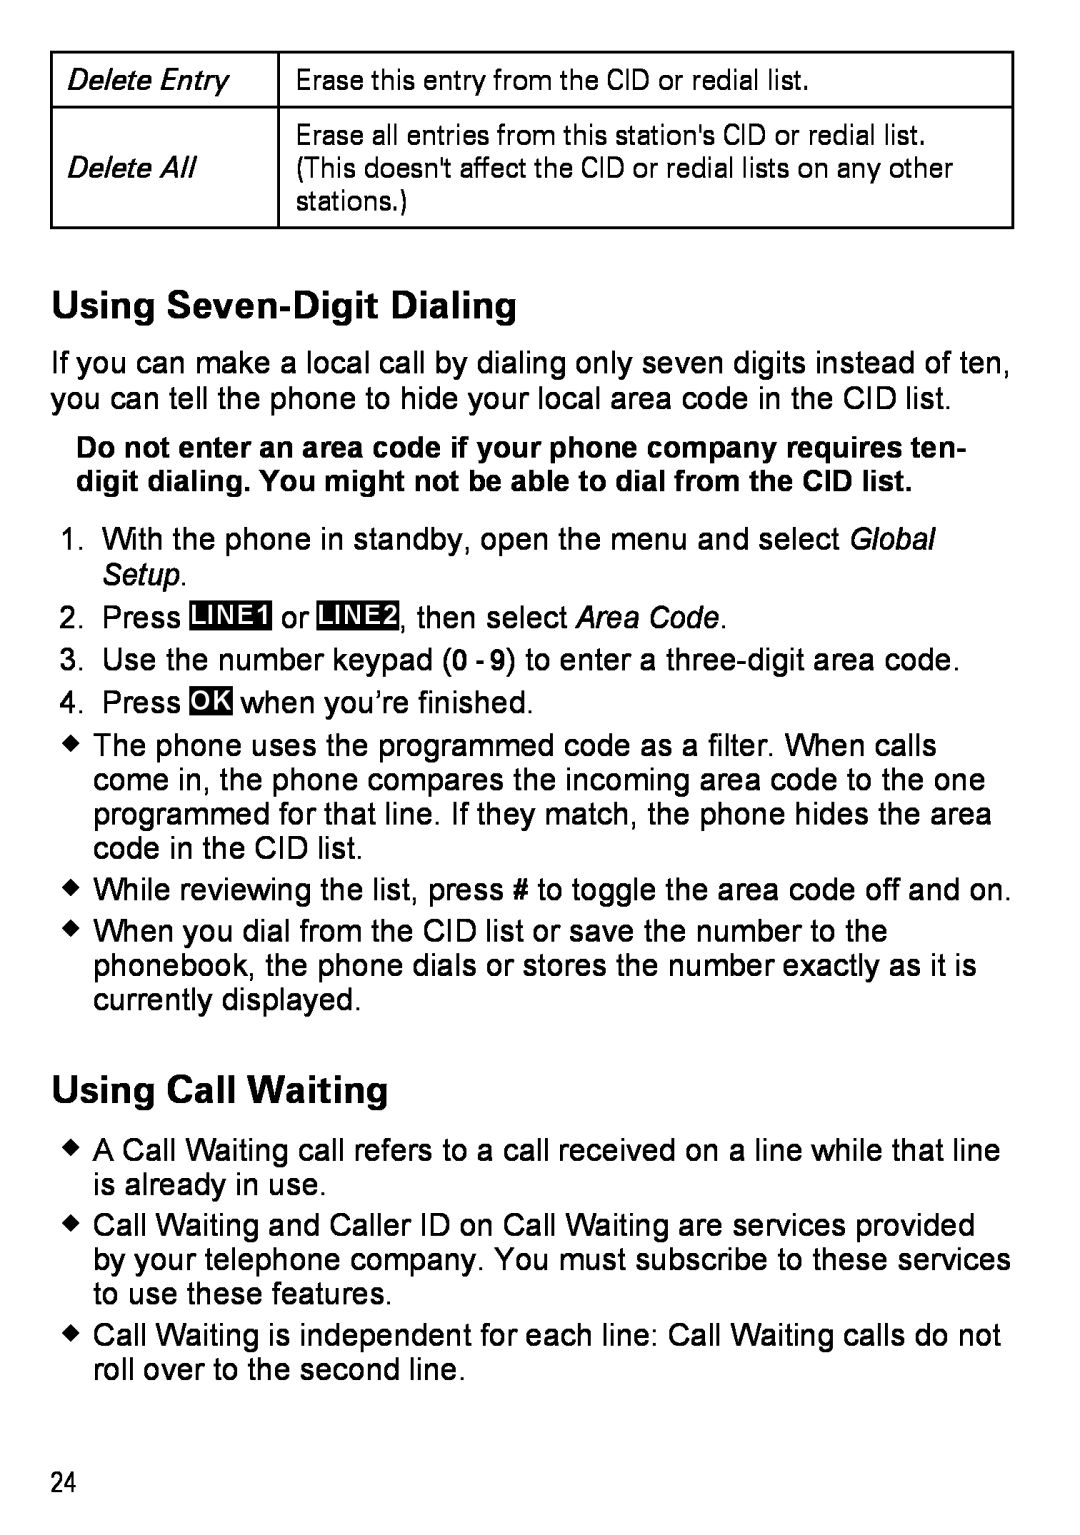 Uniden DECT4086-3, DECT4086-2, DECT4086-4, DECT4086-5, DECT4086-6 manual Using Seven-Digit Dialing, Using Call Waiting 